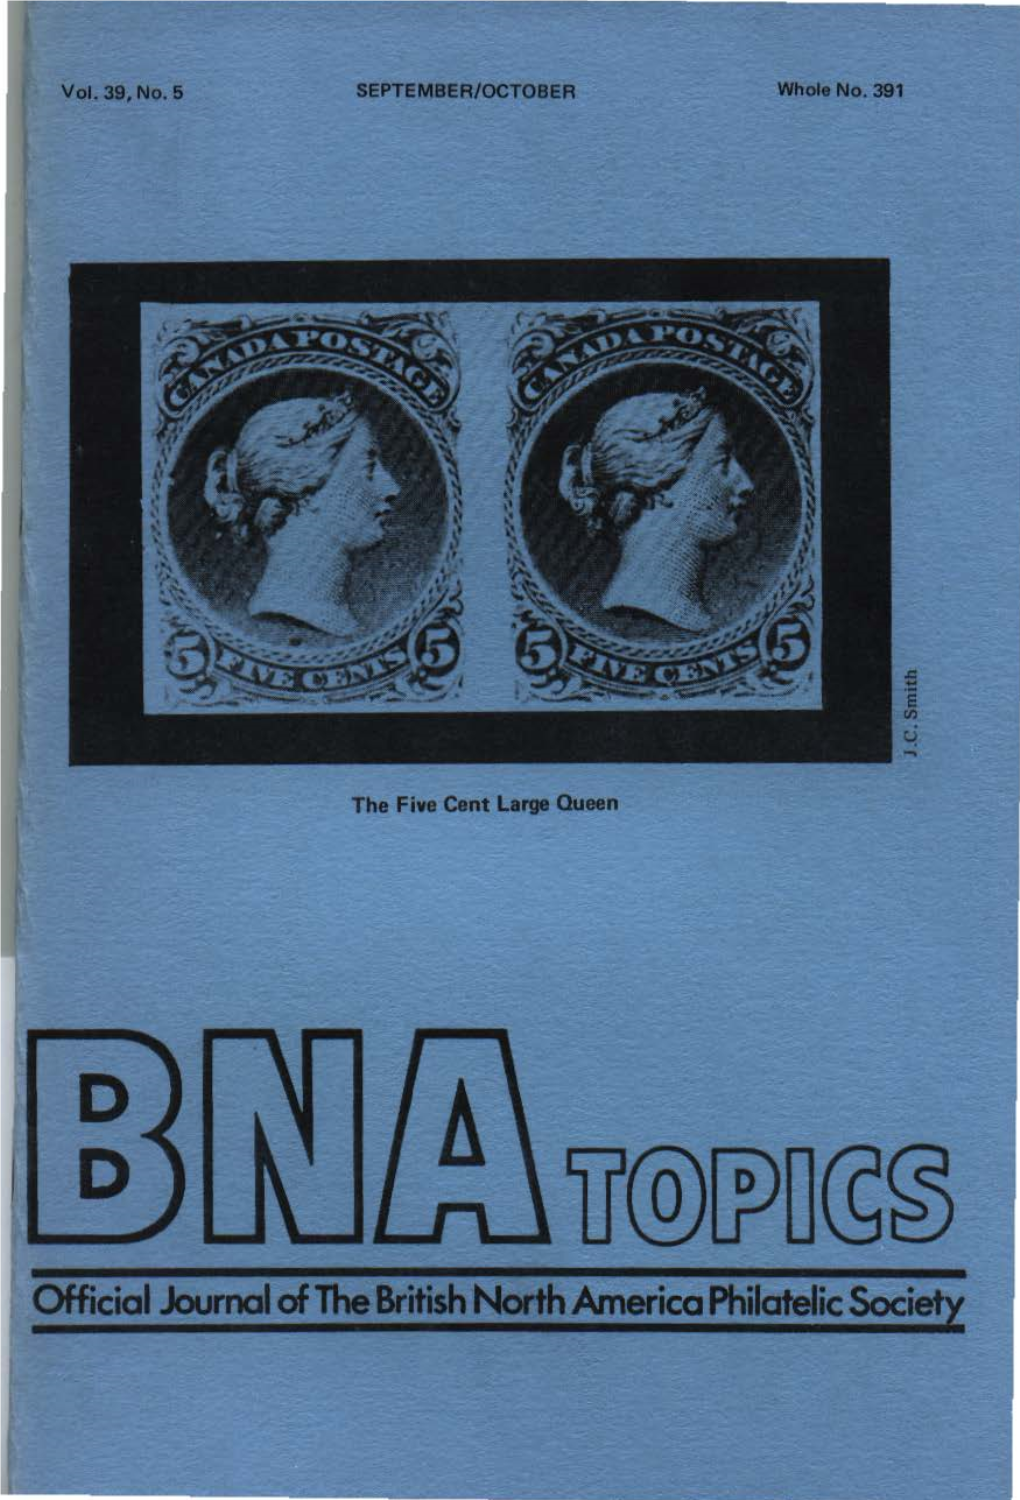 Official Journal of the British North America Philatelic Society GEORGE S